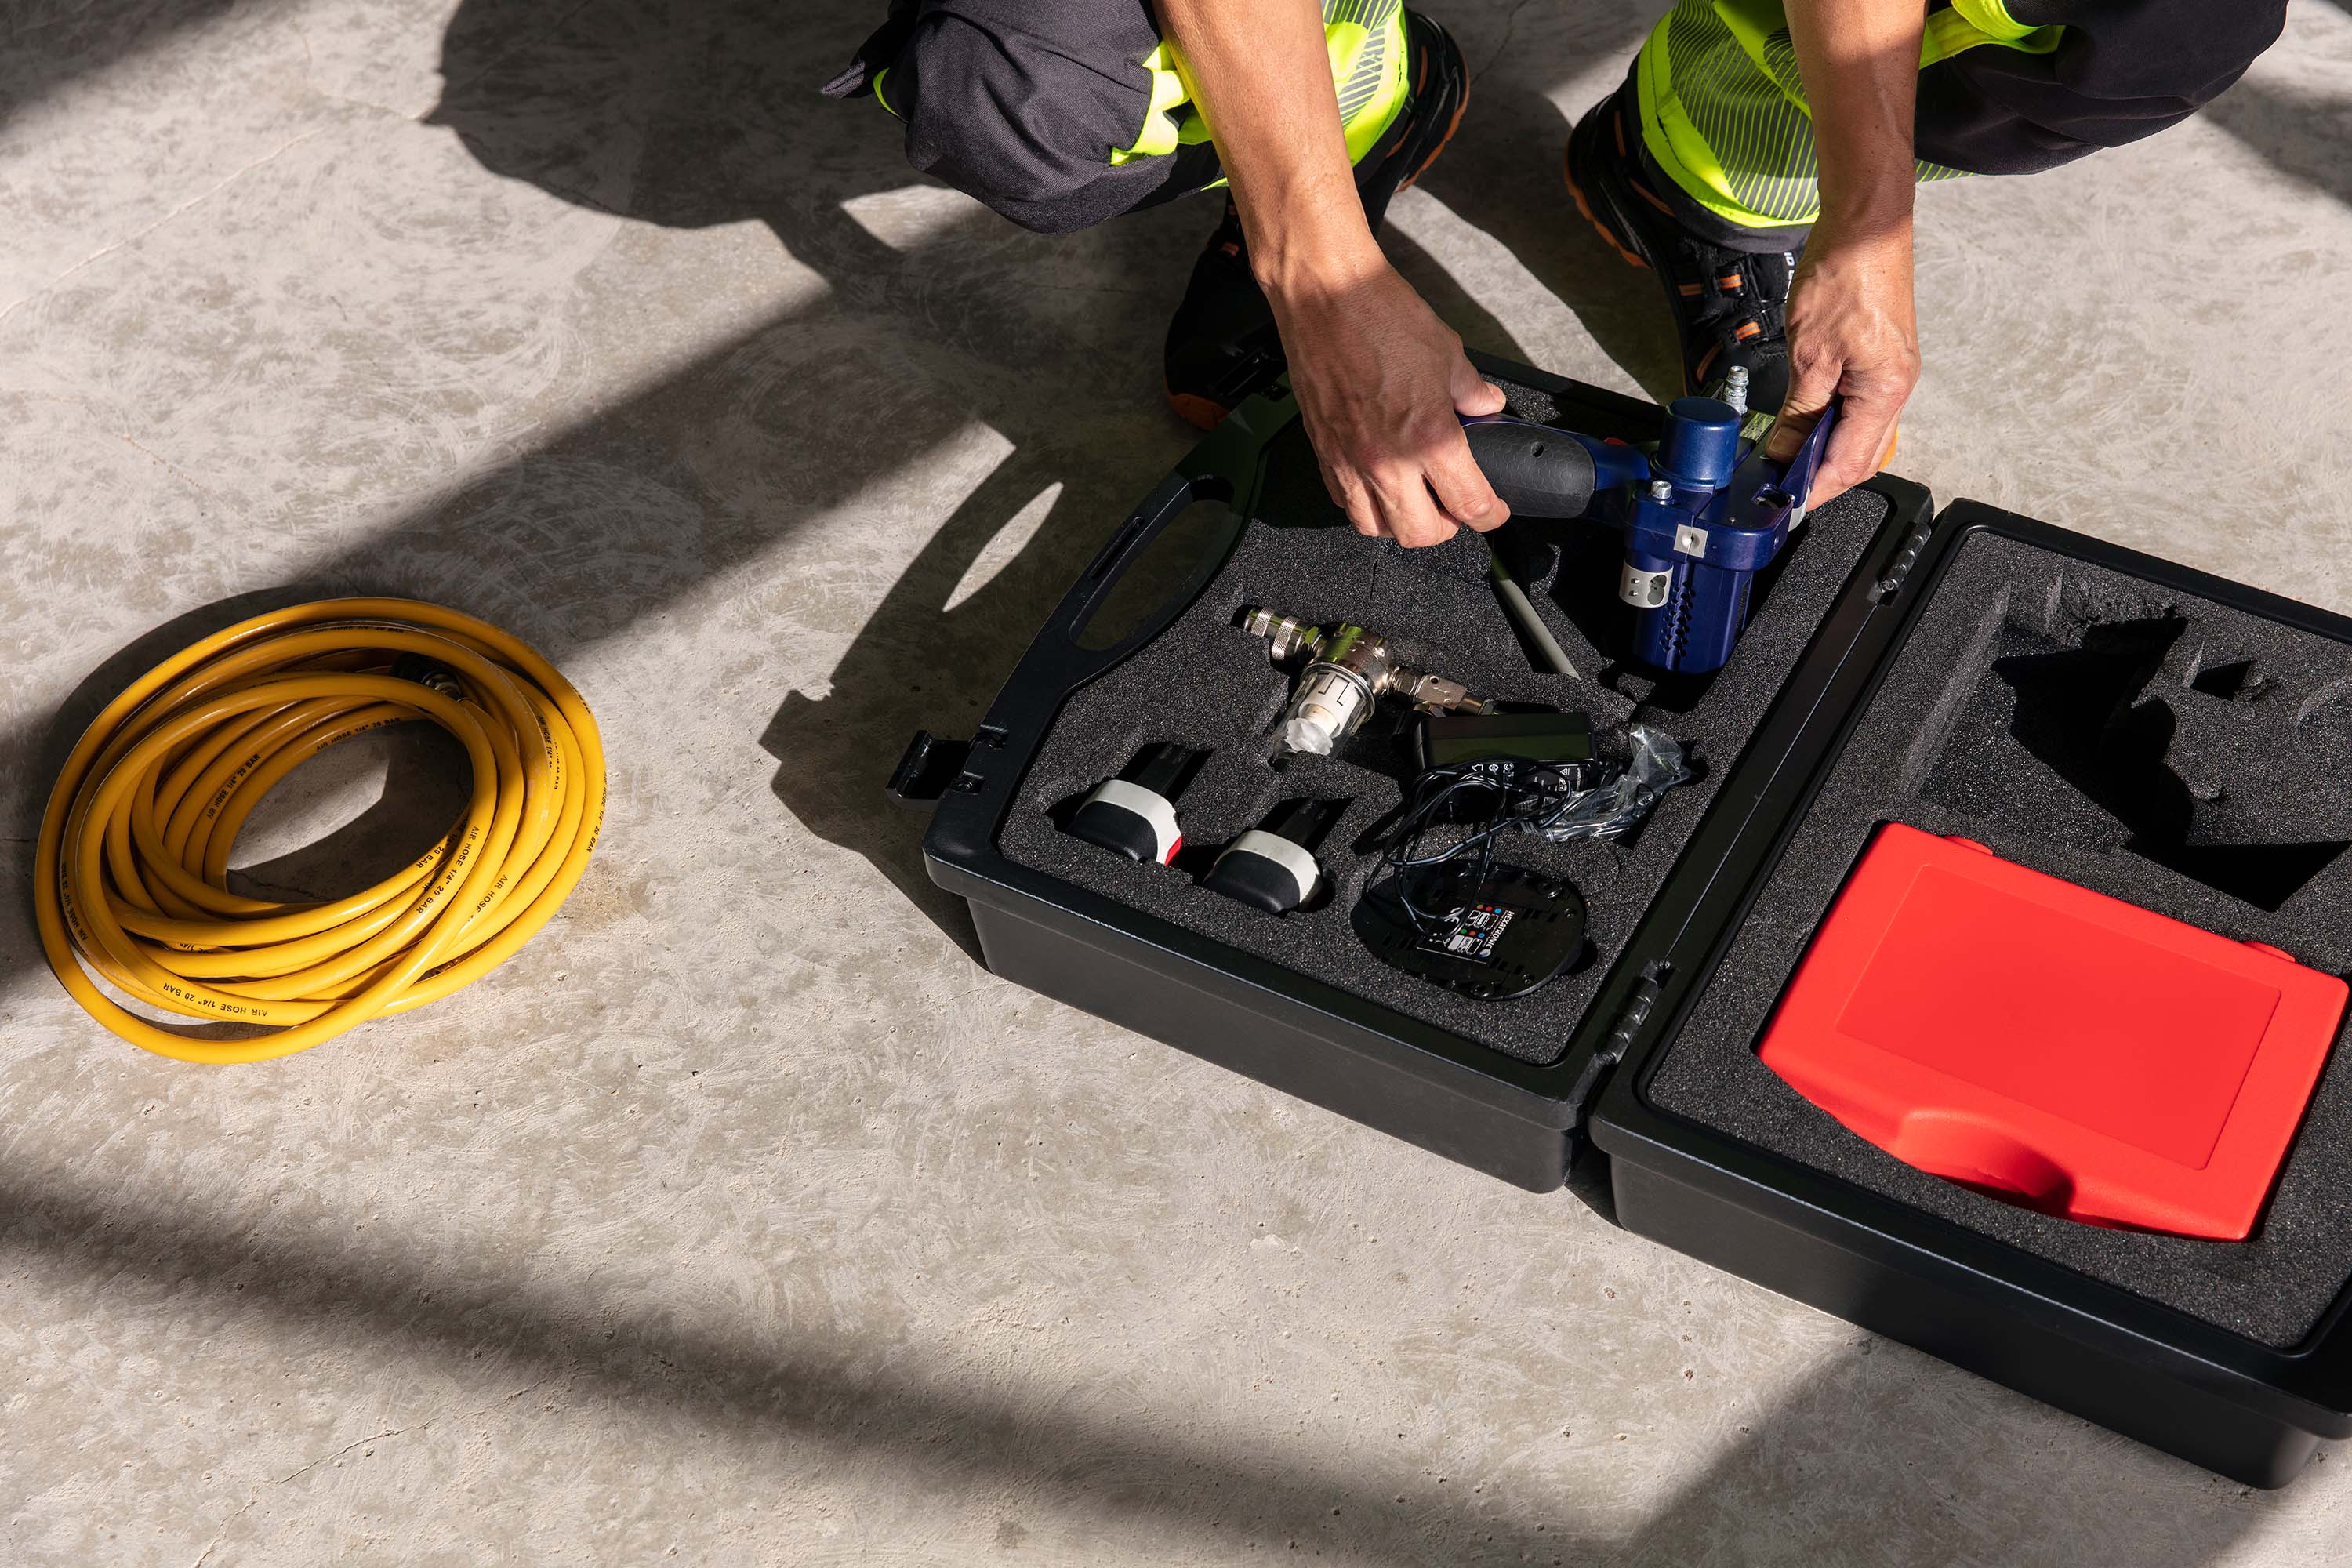 A person in safety gear is kneeling on a concrete floor, organizing a toolbox with various tools, next to a coiled yellow hose.